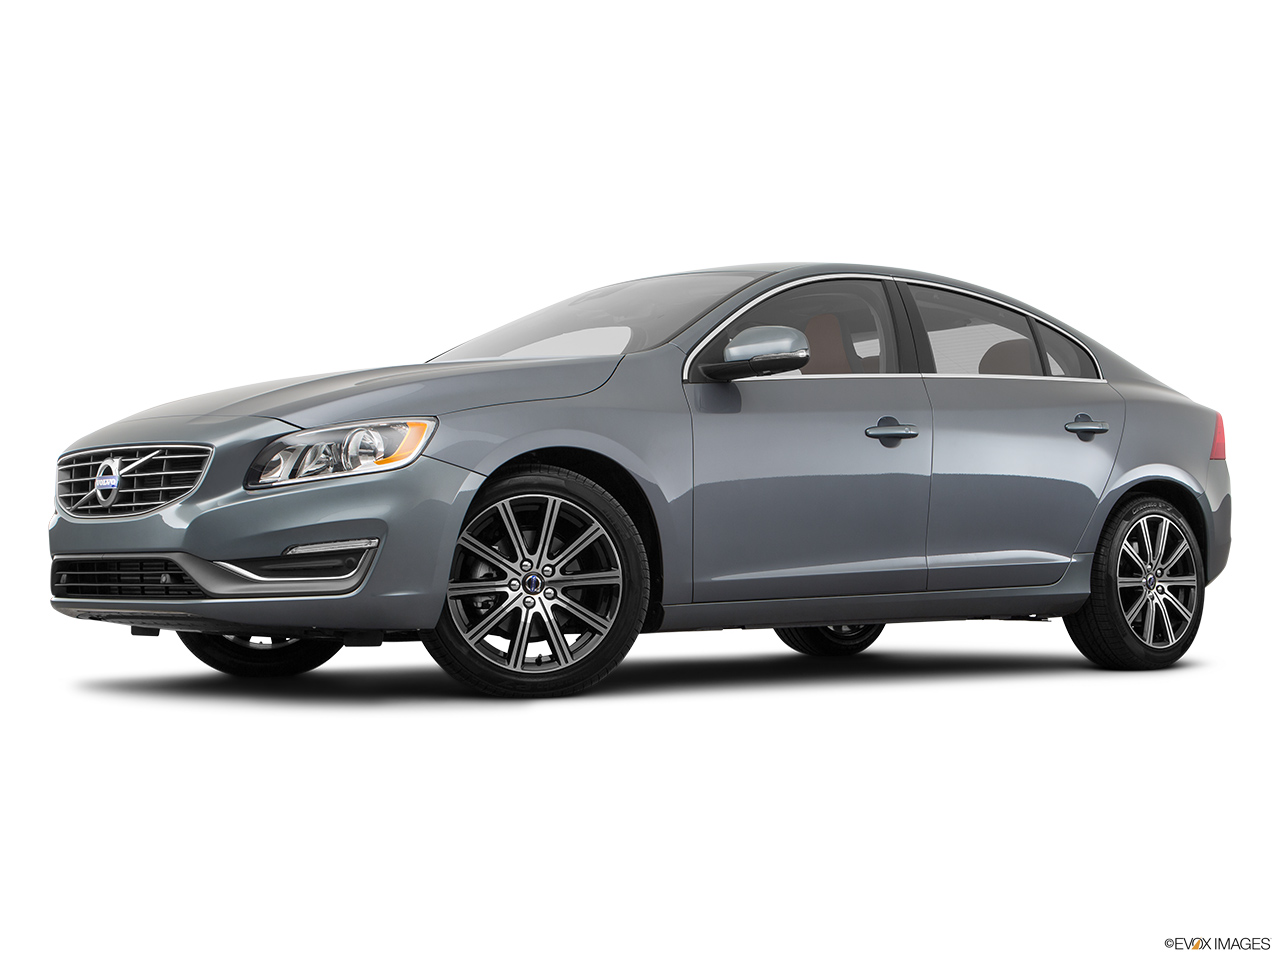 2017 Volvo S60 T5 Inscription Low/wide front 5/8. 